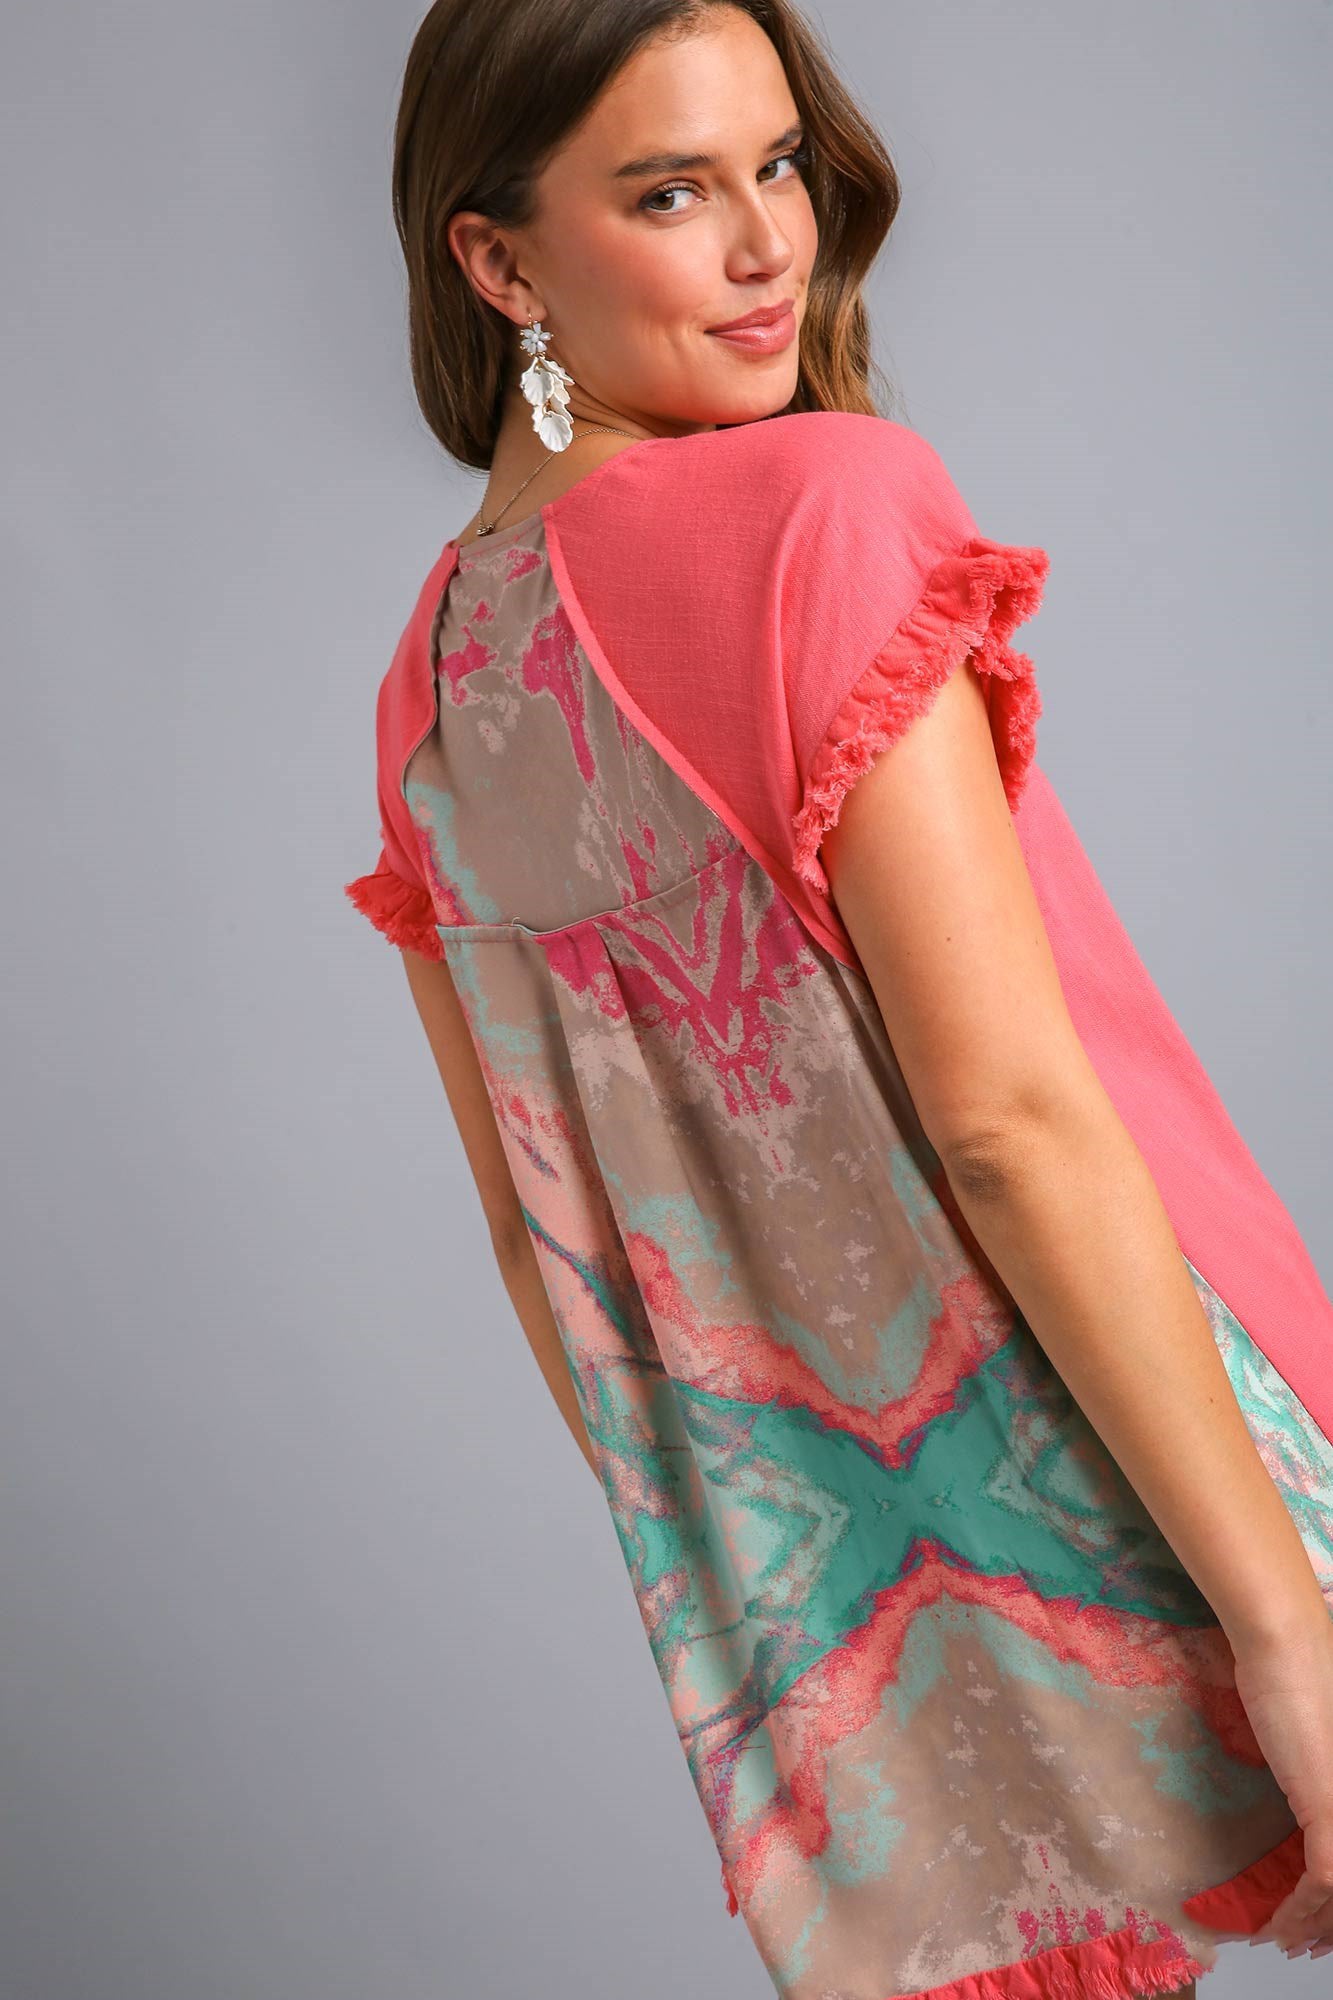 Abstract Print Unfinished Hem Top